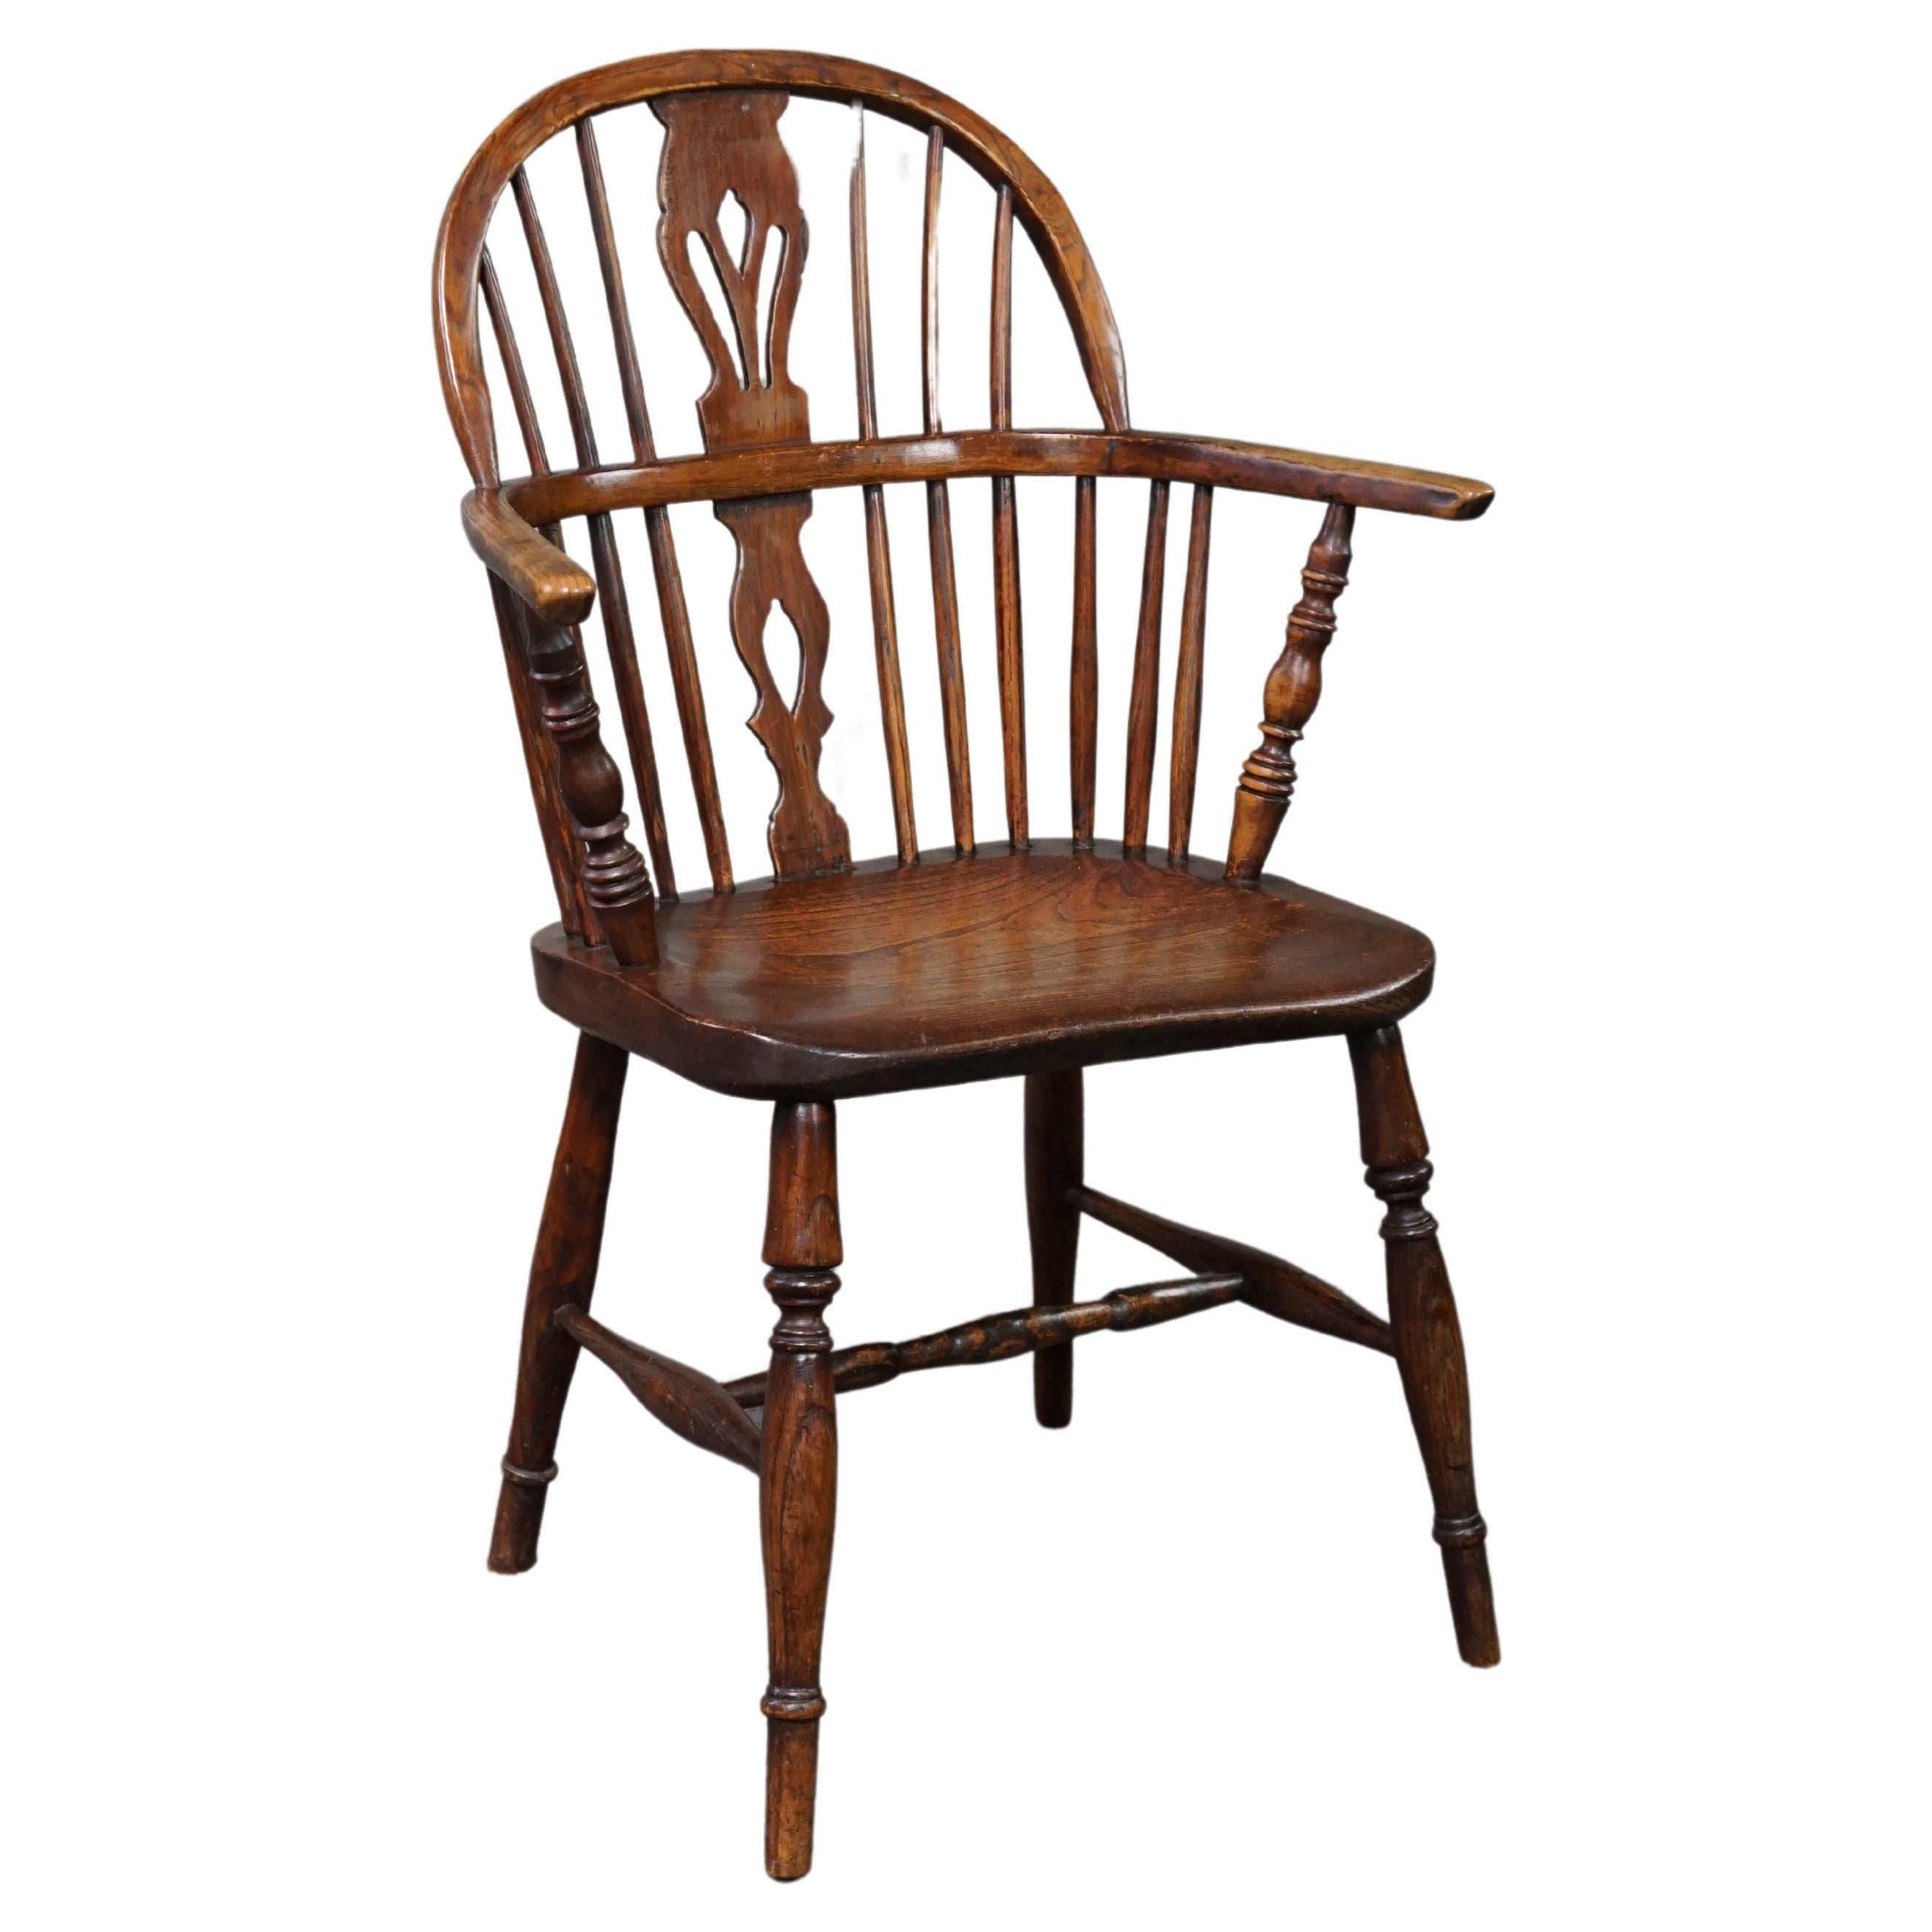 Antique English Low Back Windsor chair/armchair, 18th century For Sale